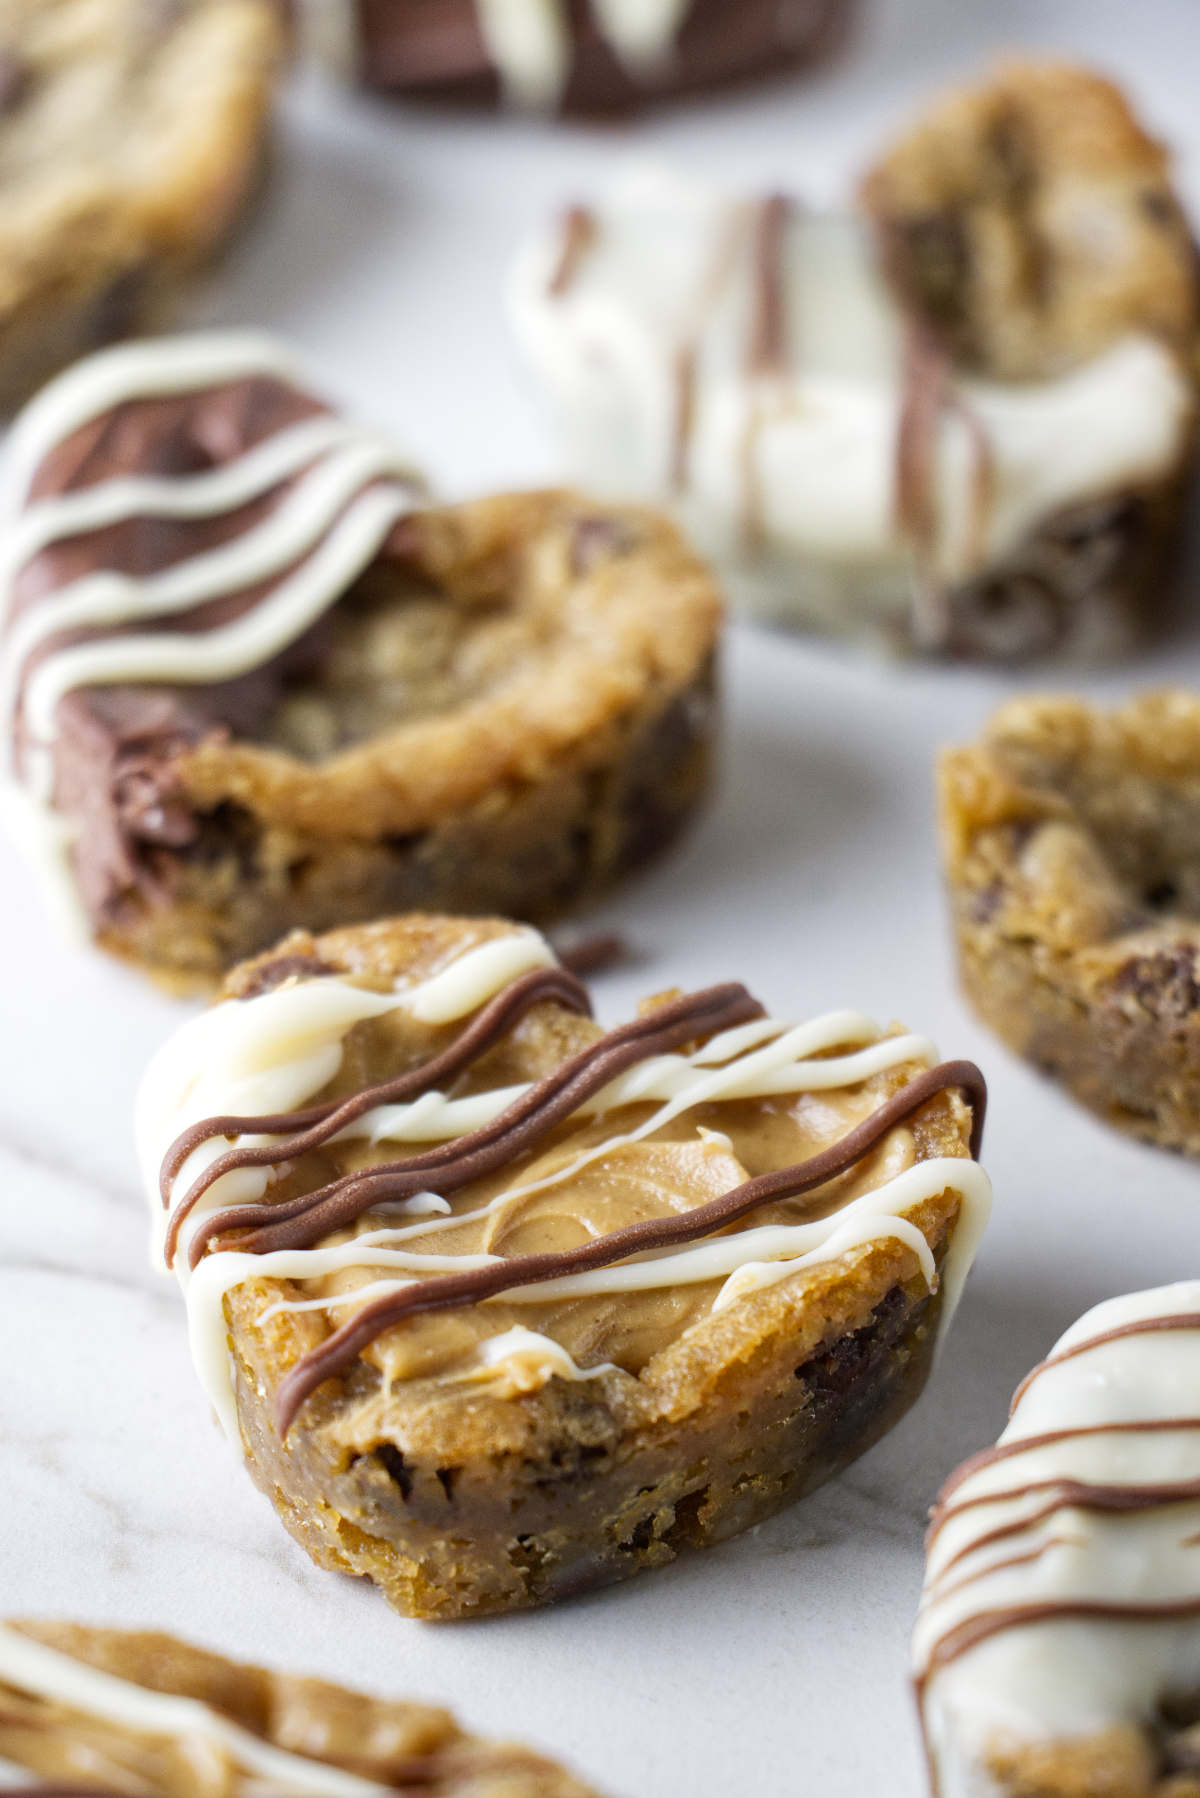 Chocolate chip cookies shaped like hearts and filled with dulce de leche.